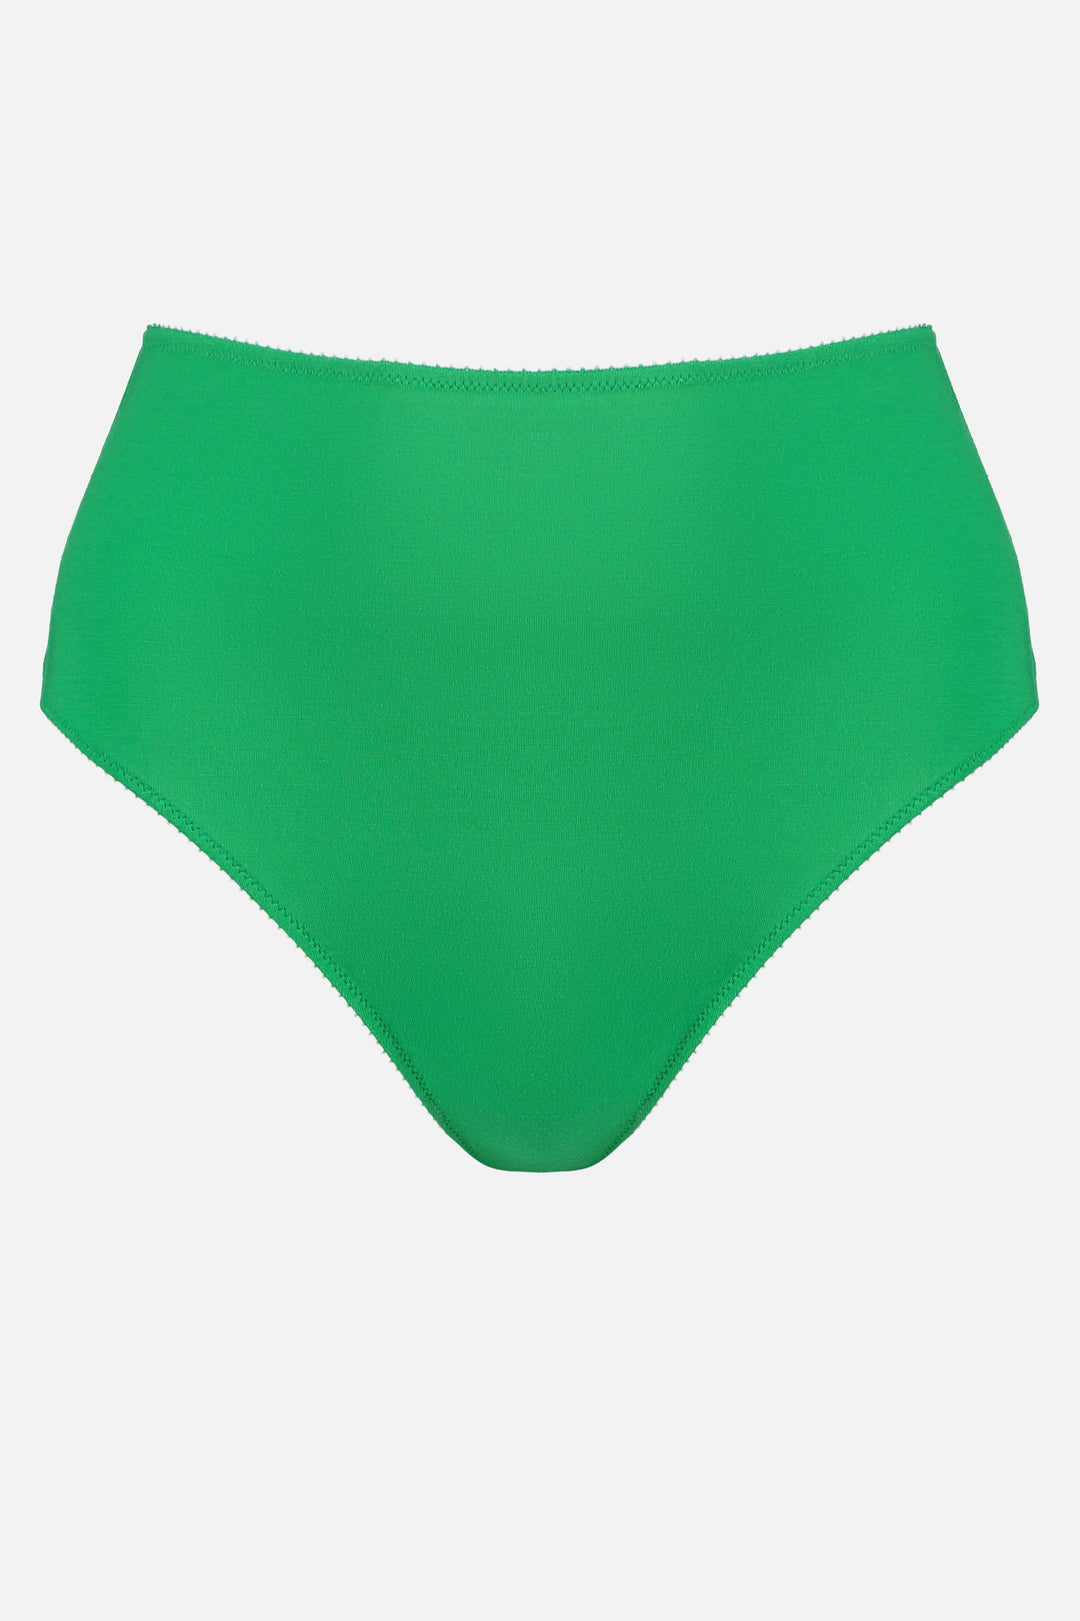 Videris Lingerie high waist knicker in green TENCEL™ cut to follow the natural curve of your hips